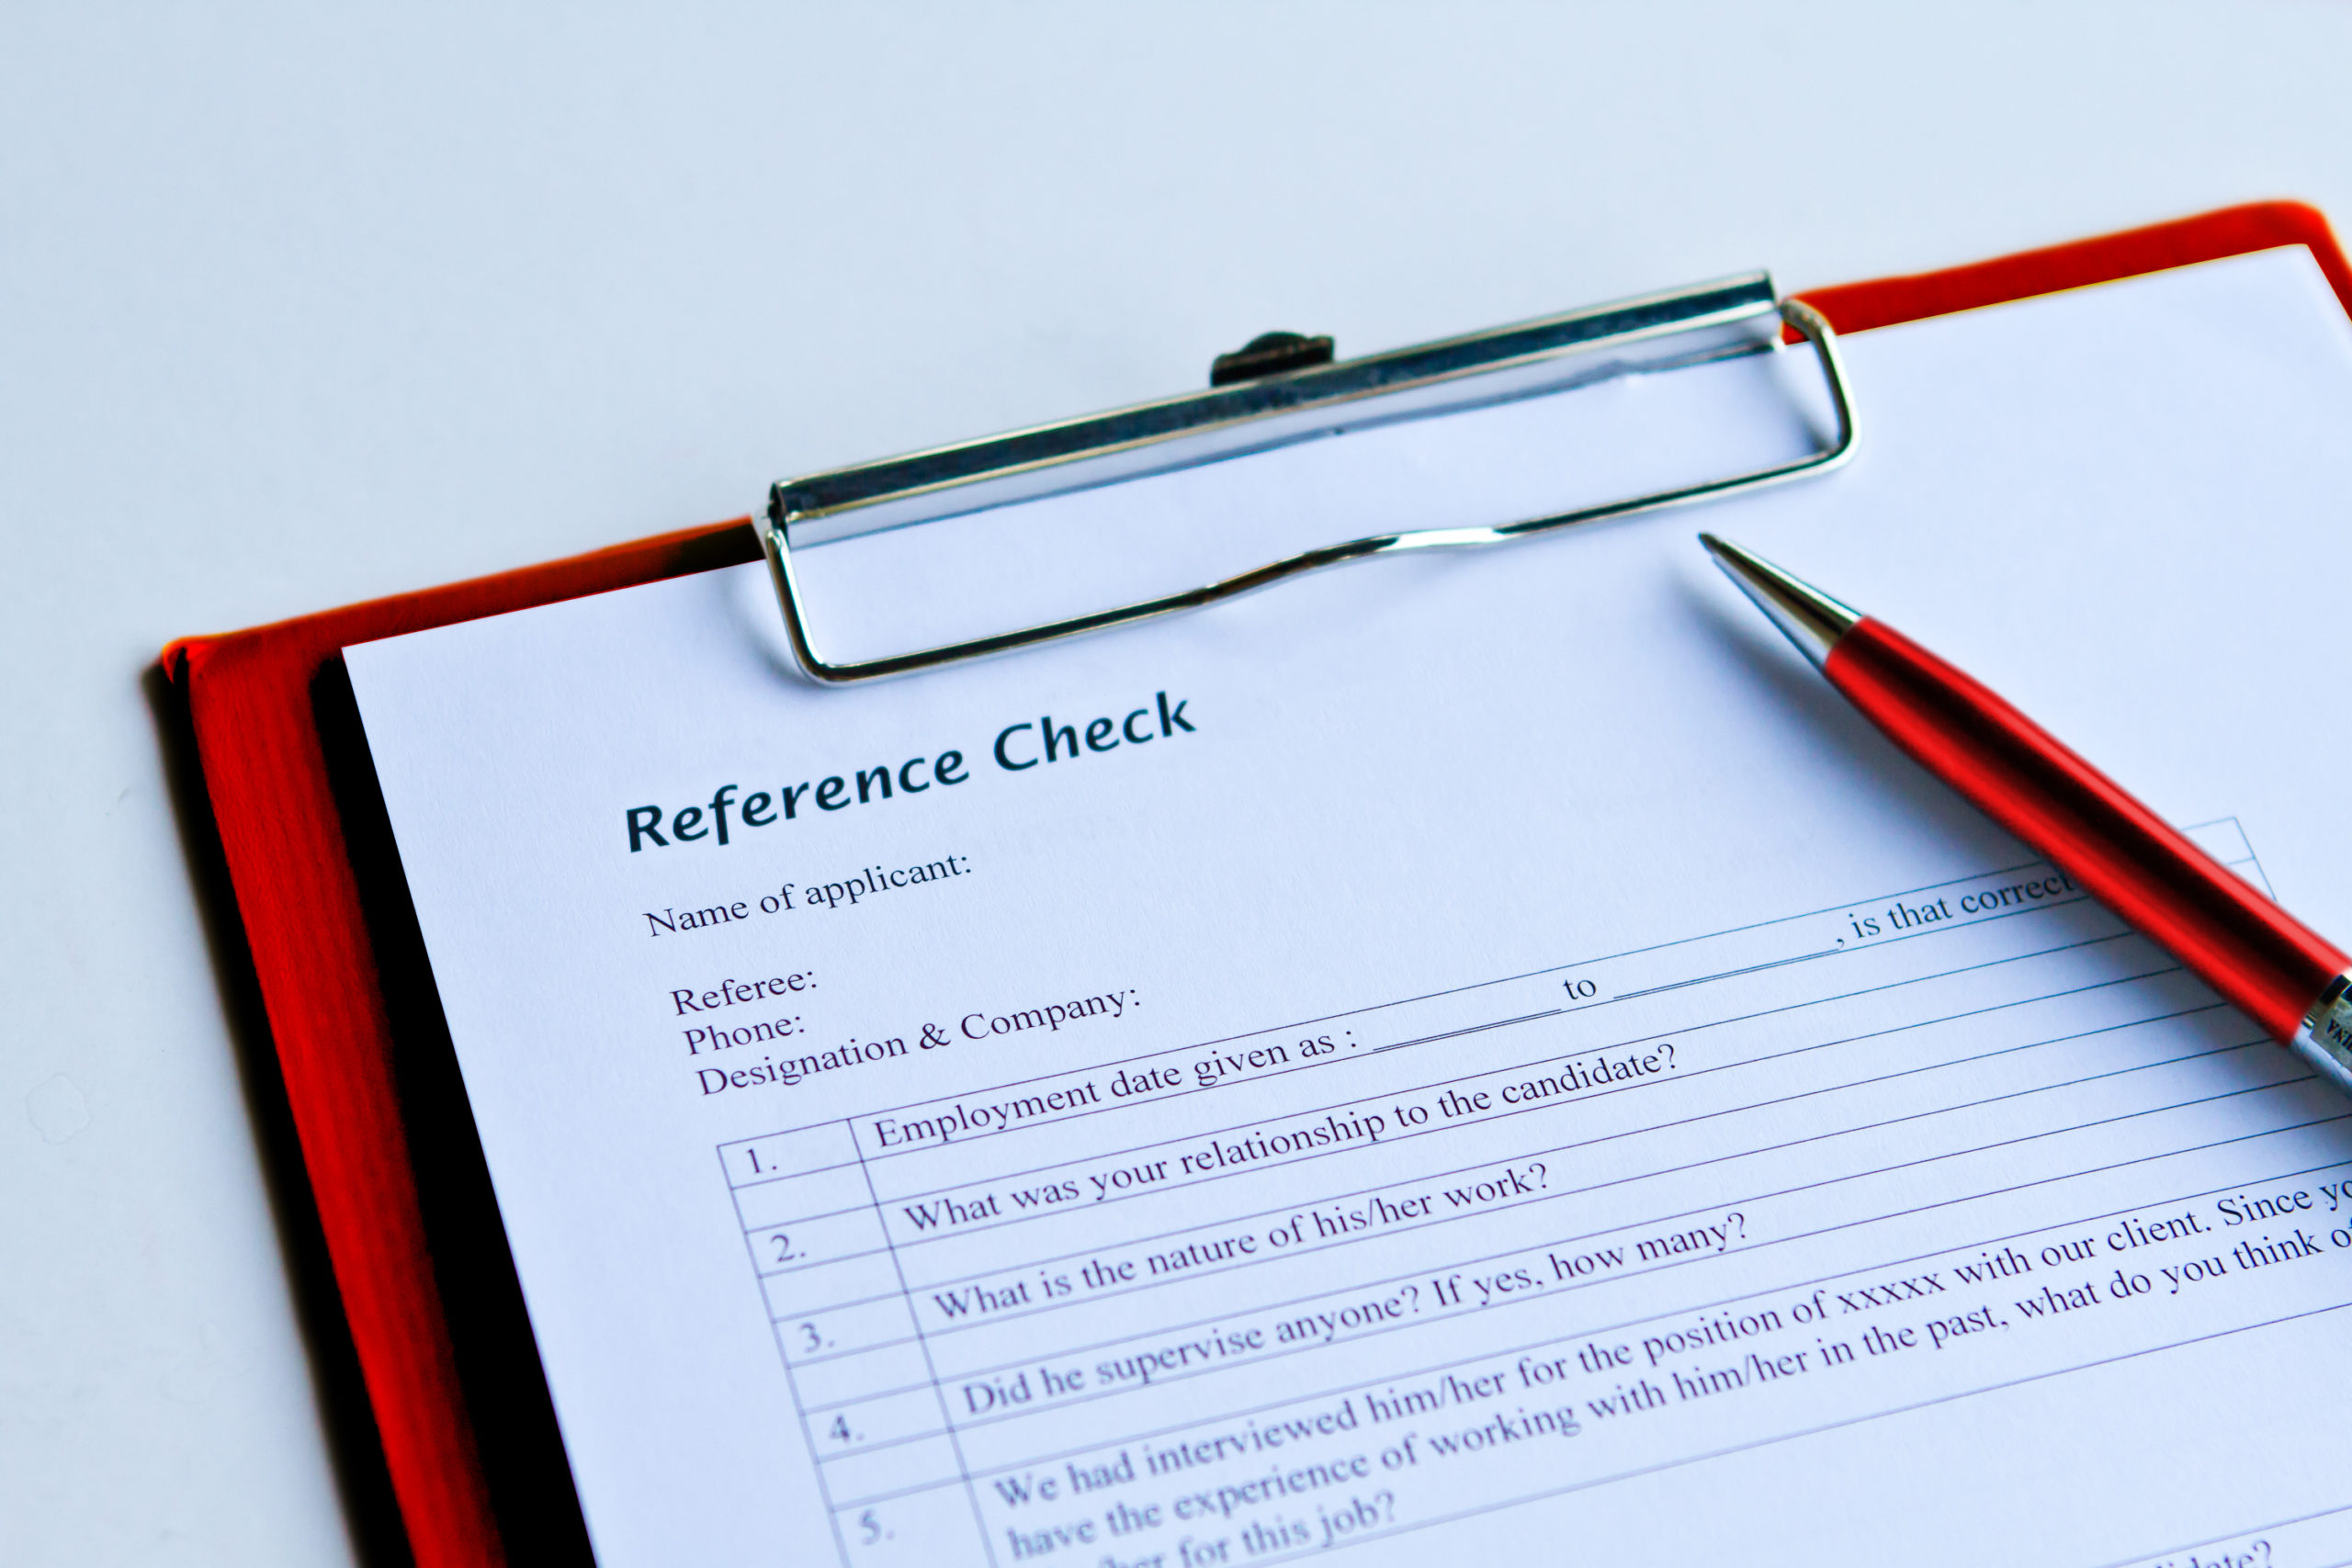 Reference Checks in the Hiring Process